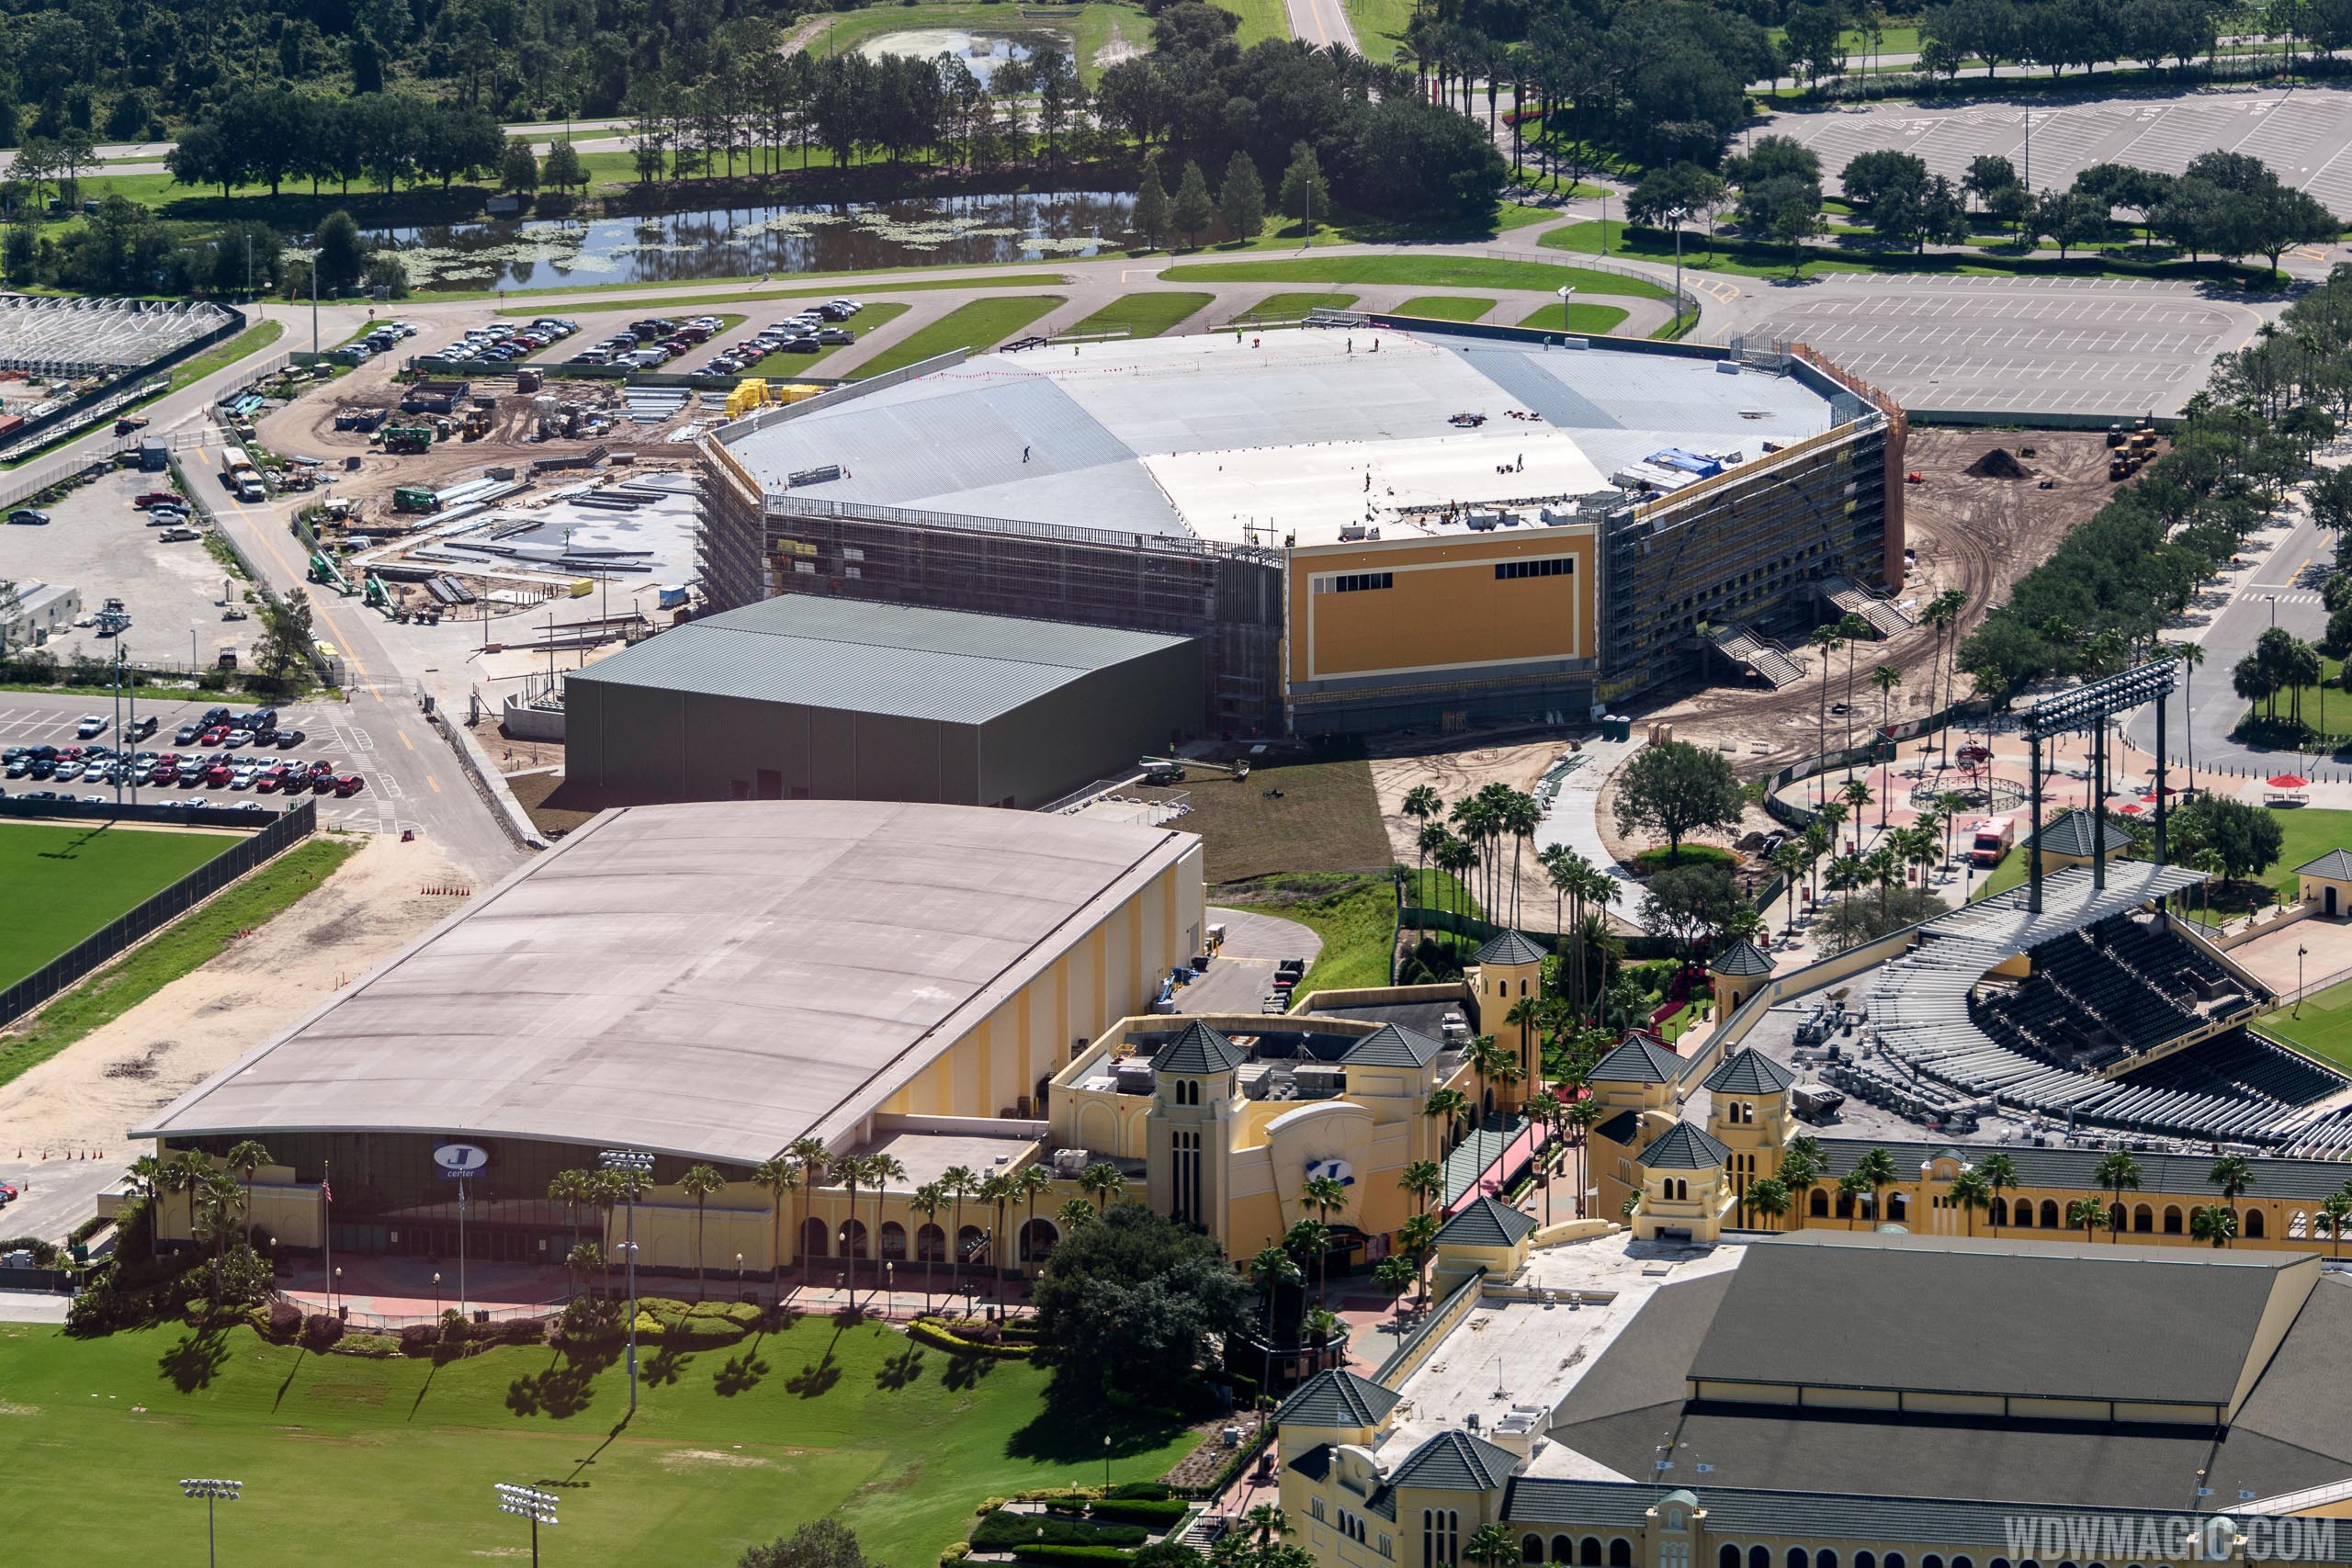 ESPN Wide World of Sports cheer and dance venue construction from the